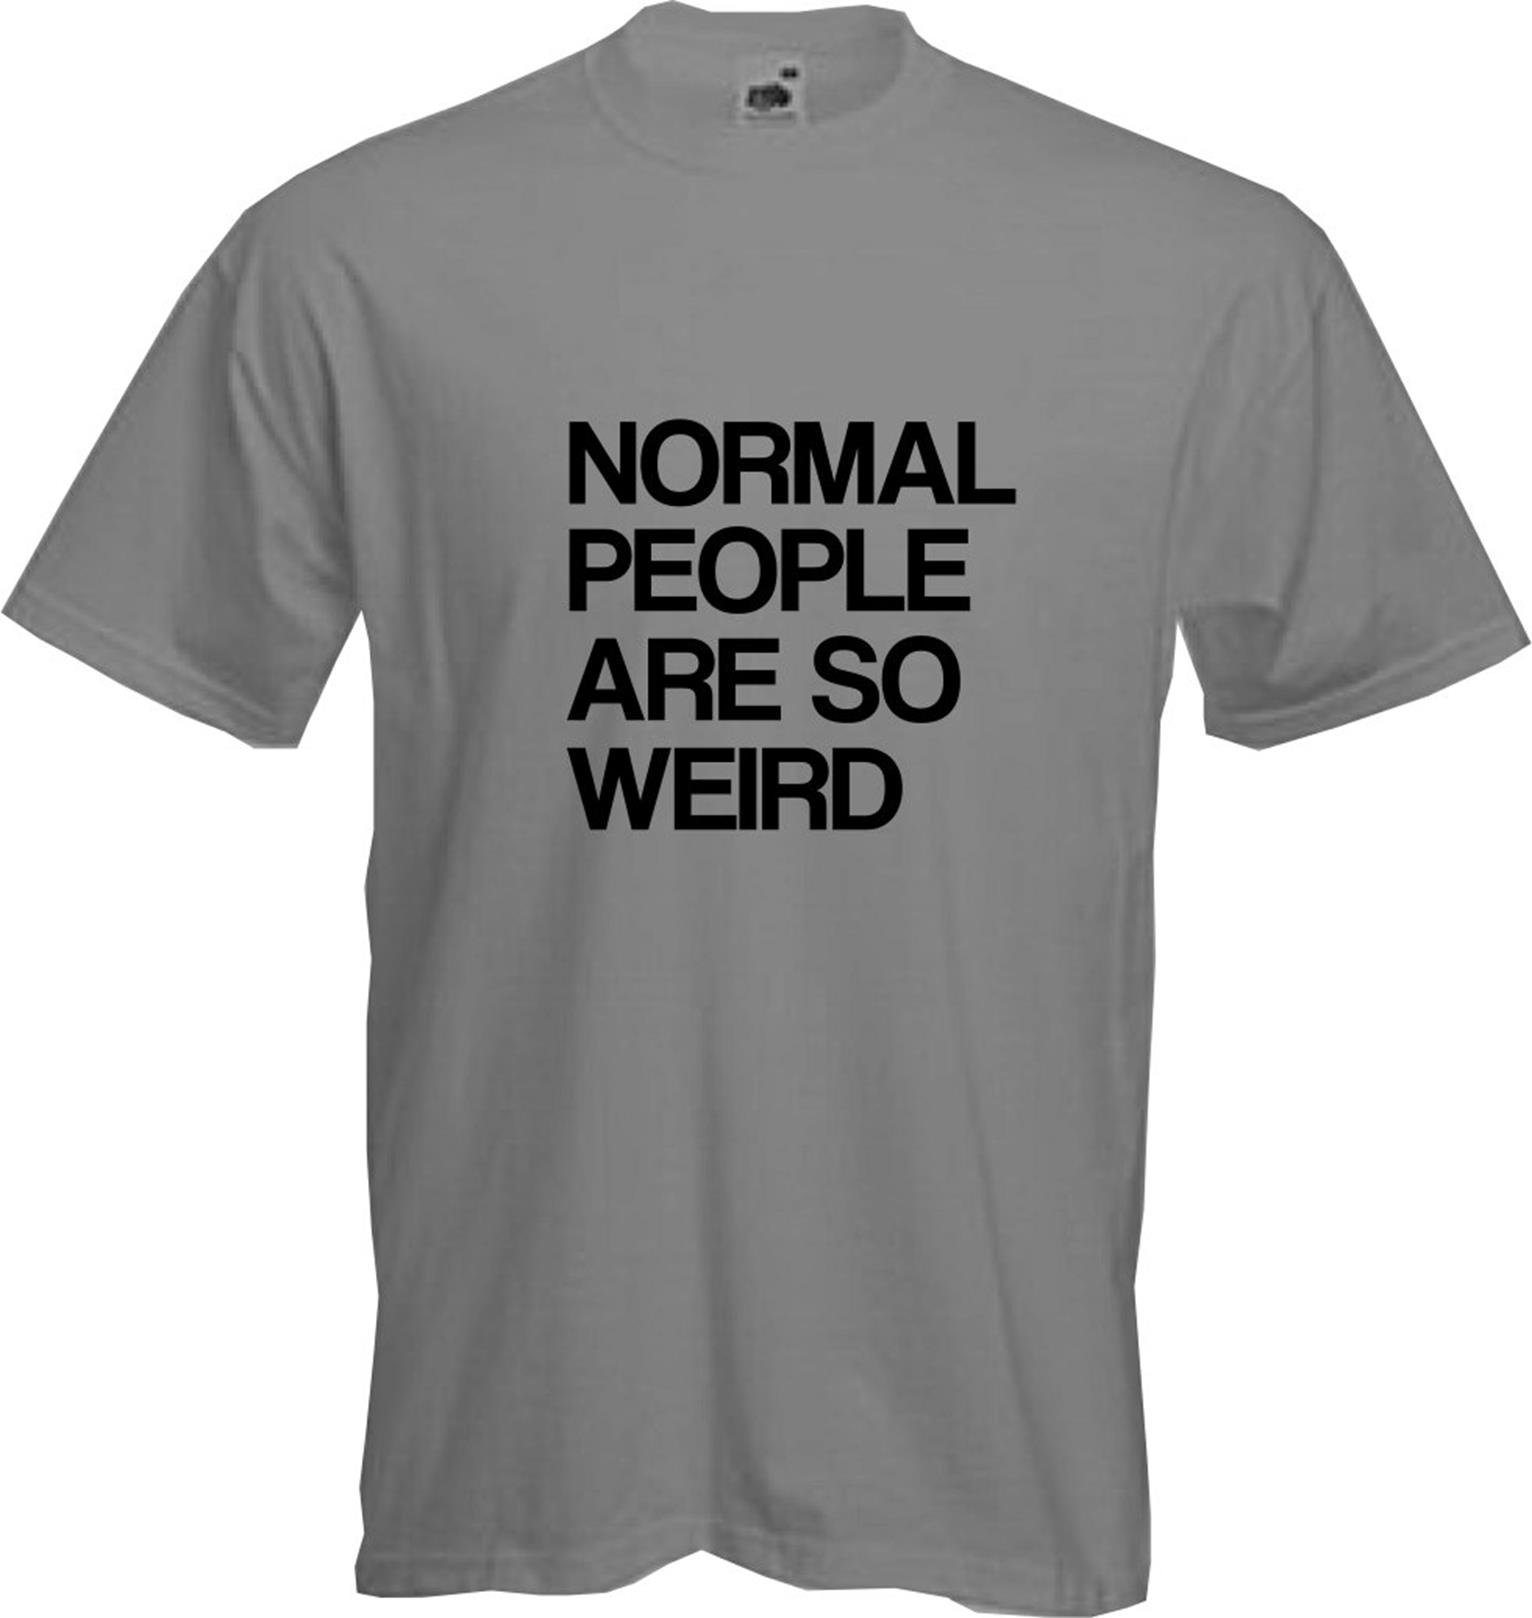 NORMAL PEOPLE ARE SO WEIRD - T Shirt, Funny, Geek, Cool, Quality, NEW ...